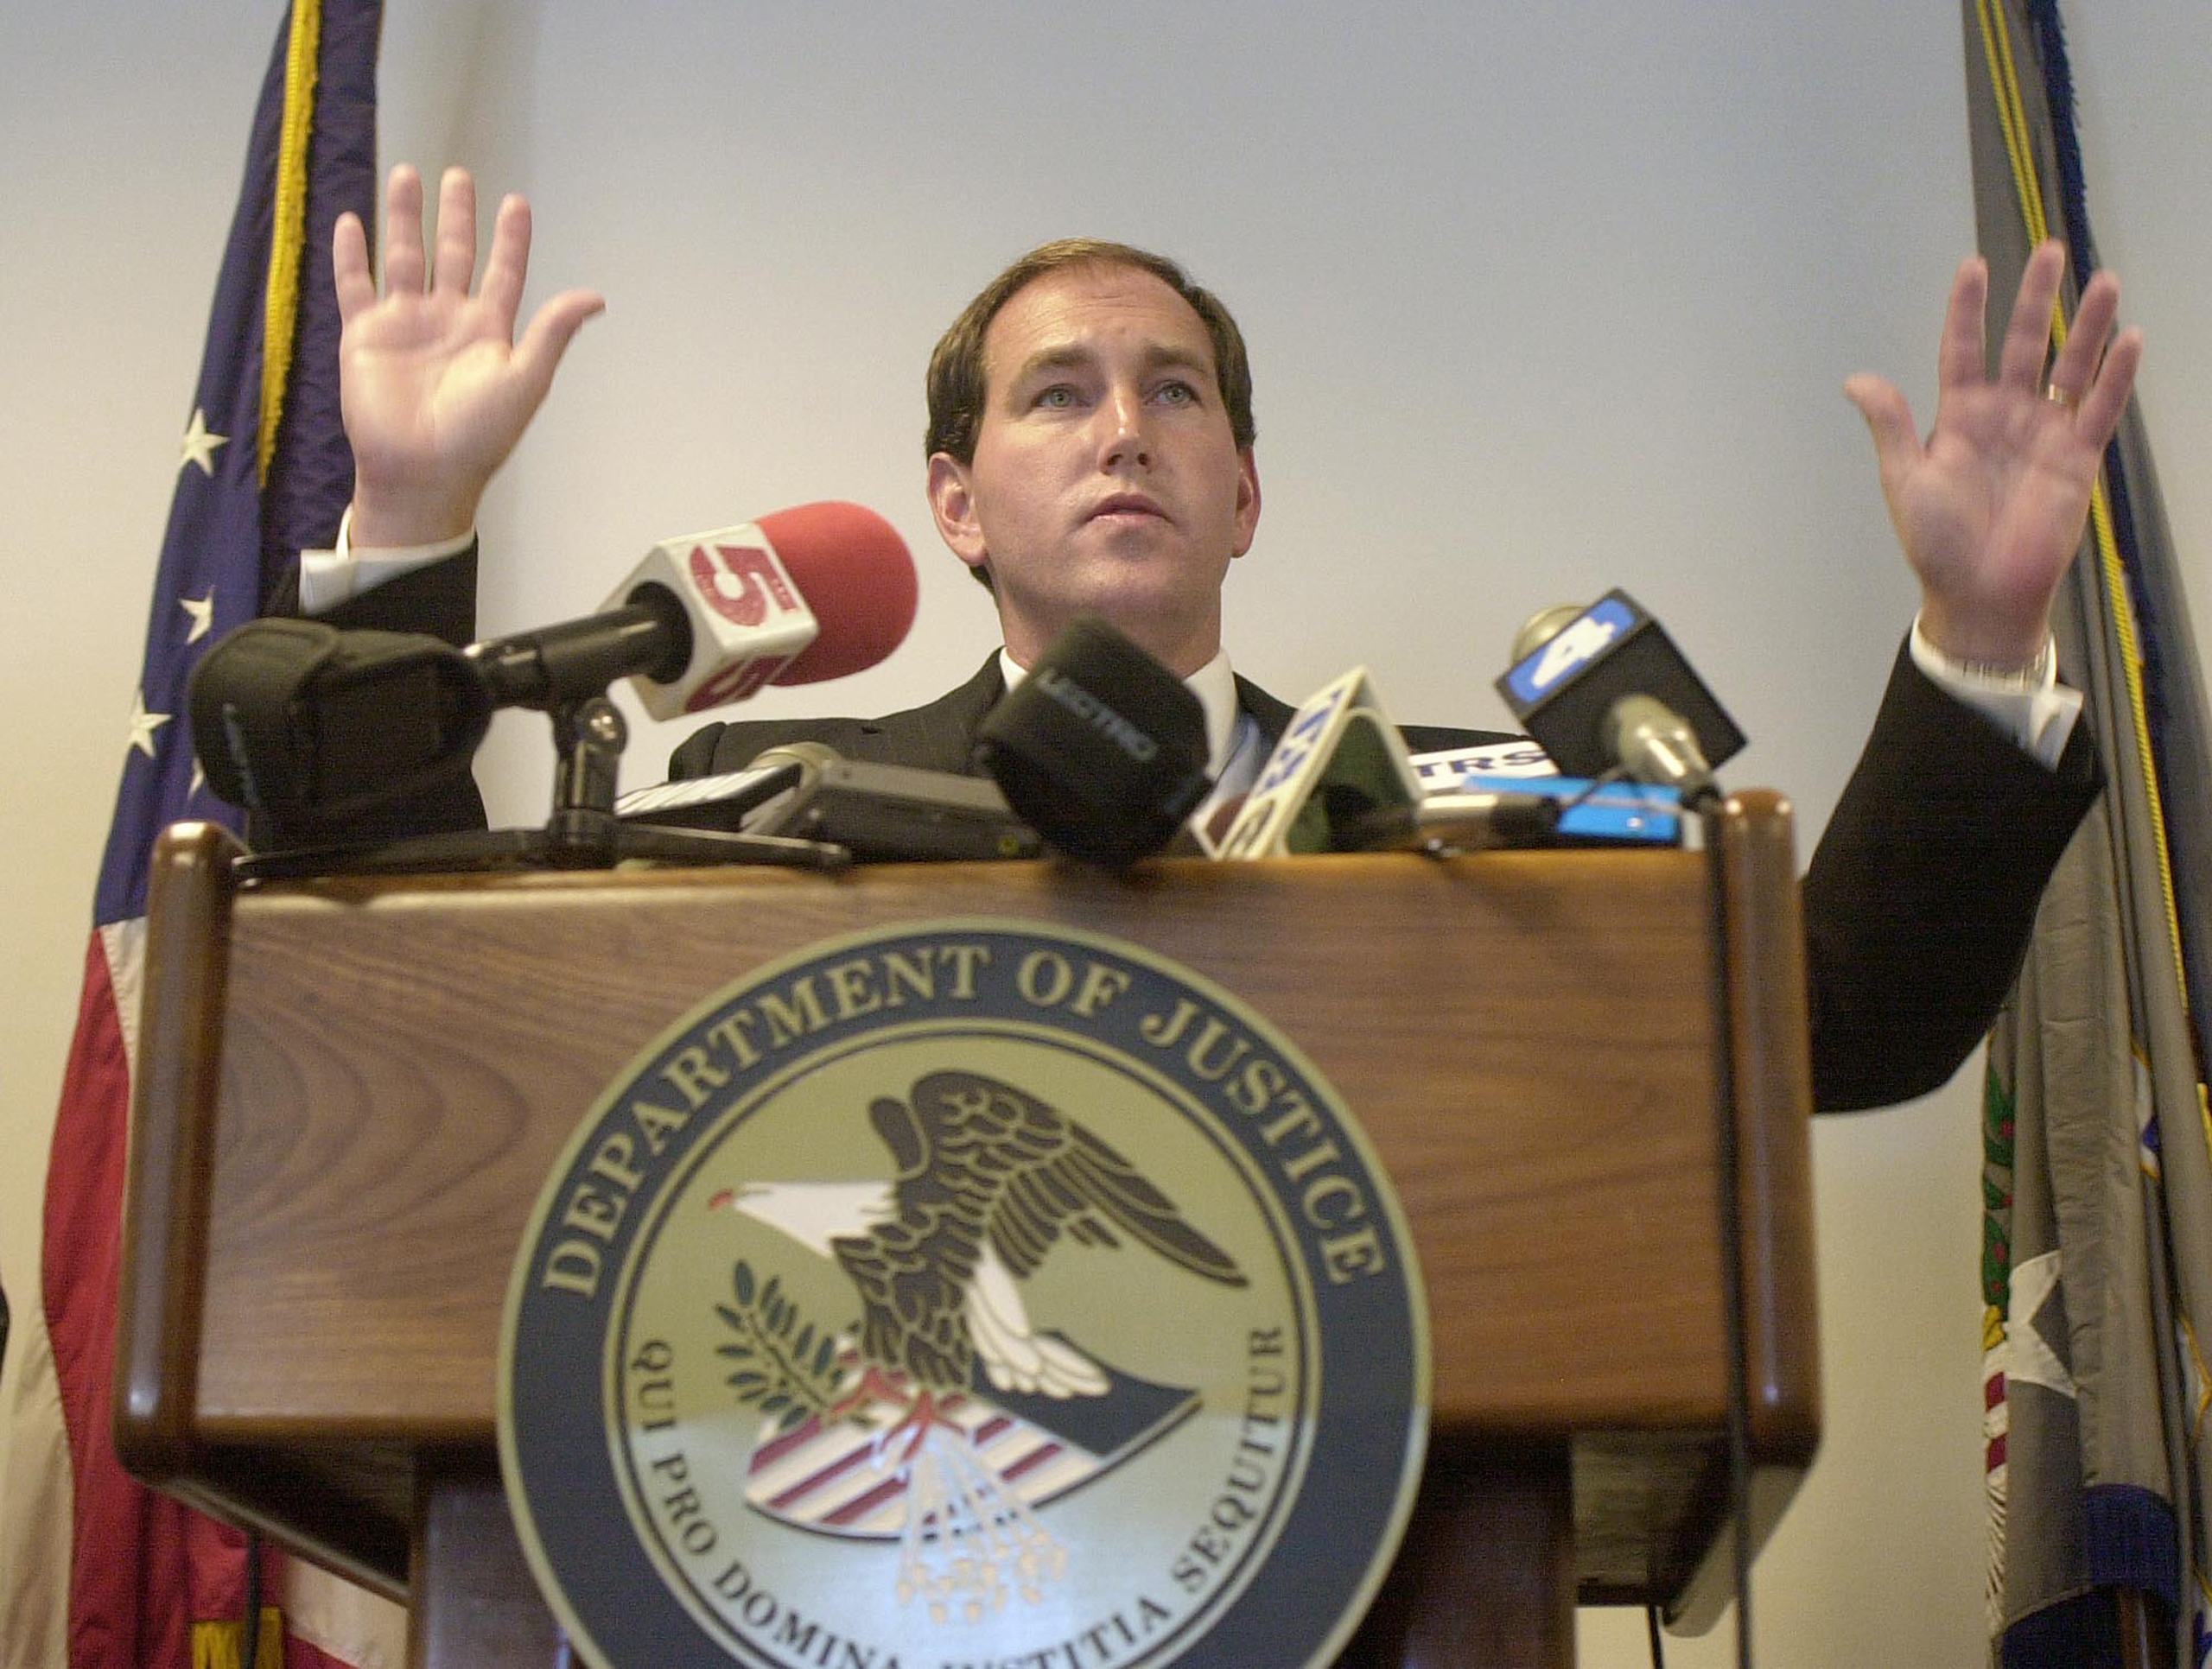 Raymond W. Gruender, United States Attorney, Eastern District of Missouri, gestures Wednesday, Oct. 3, 2001 while responding to questions concerning the U.S. Department of Justice report in the June 12, 2000, deaths of drug suspect Earl Murray and Ronald Beasley. The two unarmed men were shot and killed in the parking lot of the Jack in the Box restaurant in north St. Louis as they tried to escape in Murray's car during an encounter with a St. Louis County Multi-Jurisdictional Task Force. The report concluded that evidence does not show the unidentified officers willfully used more force than was reasonable. (AP Photo/James A. Finley)